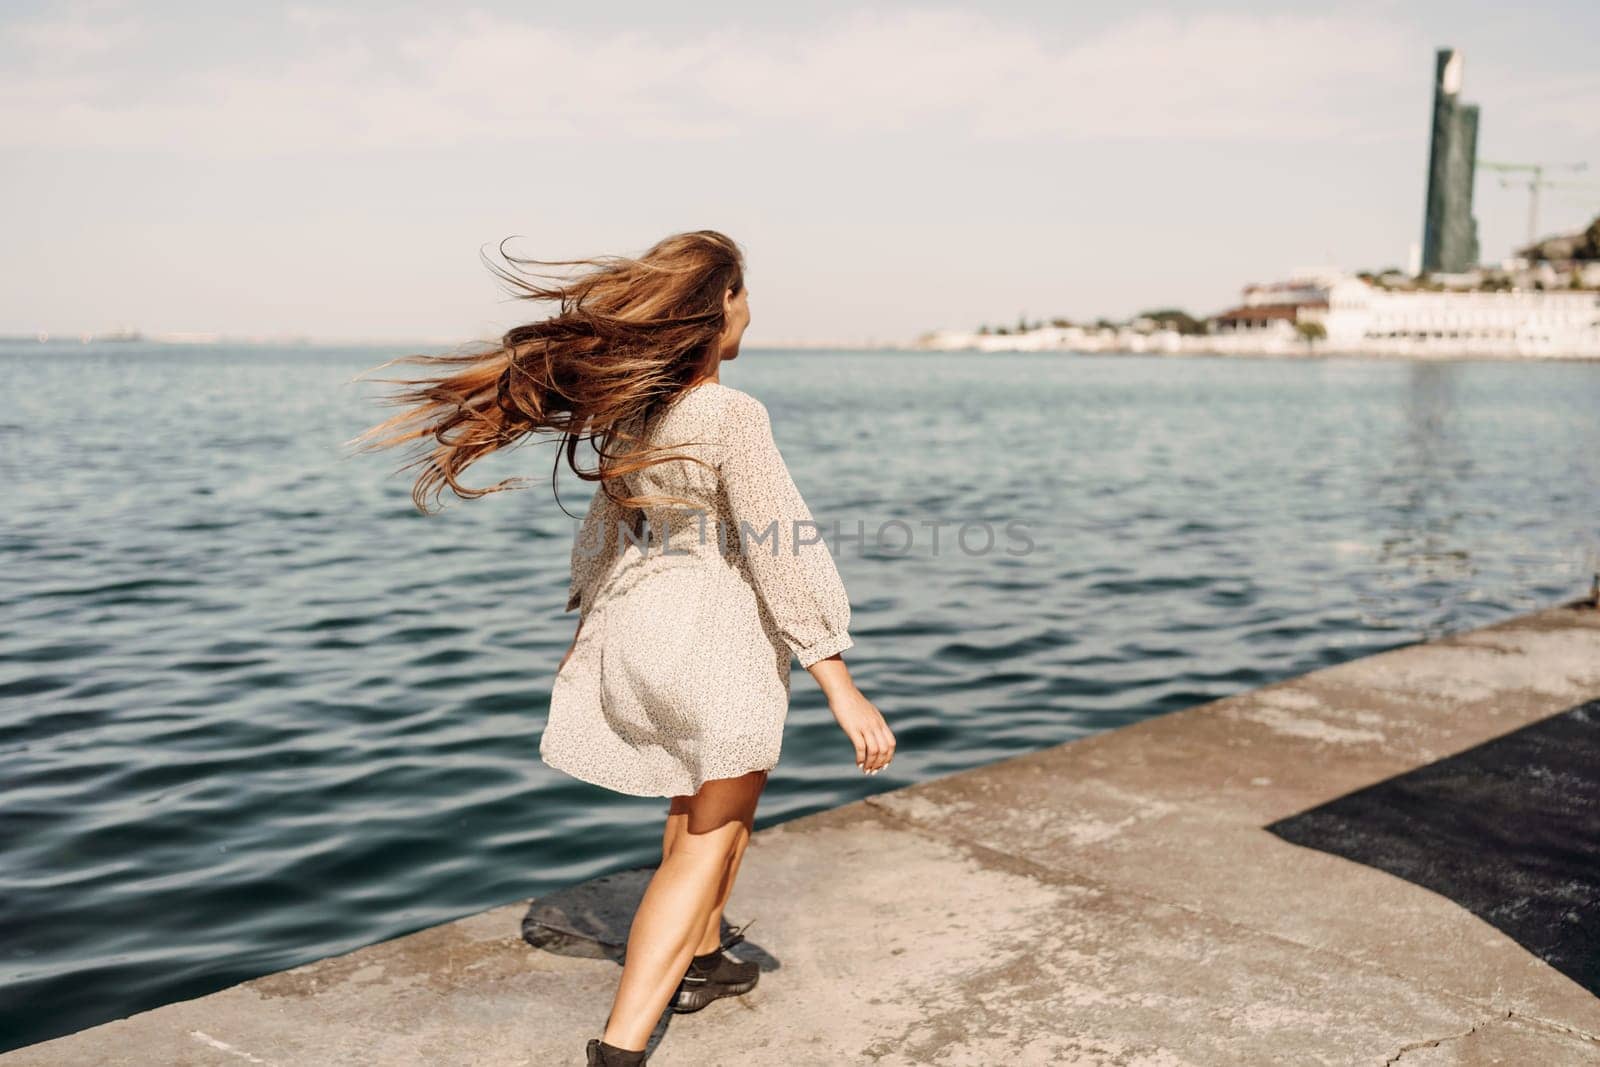 woman in a white dress is walking on a pier near the water. The scene is peaceful and serene, with the woman's long hair blowing in the wind. by Matiunina